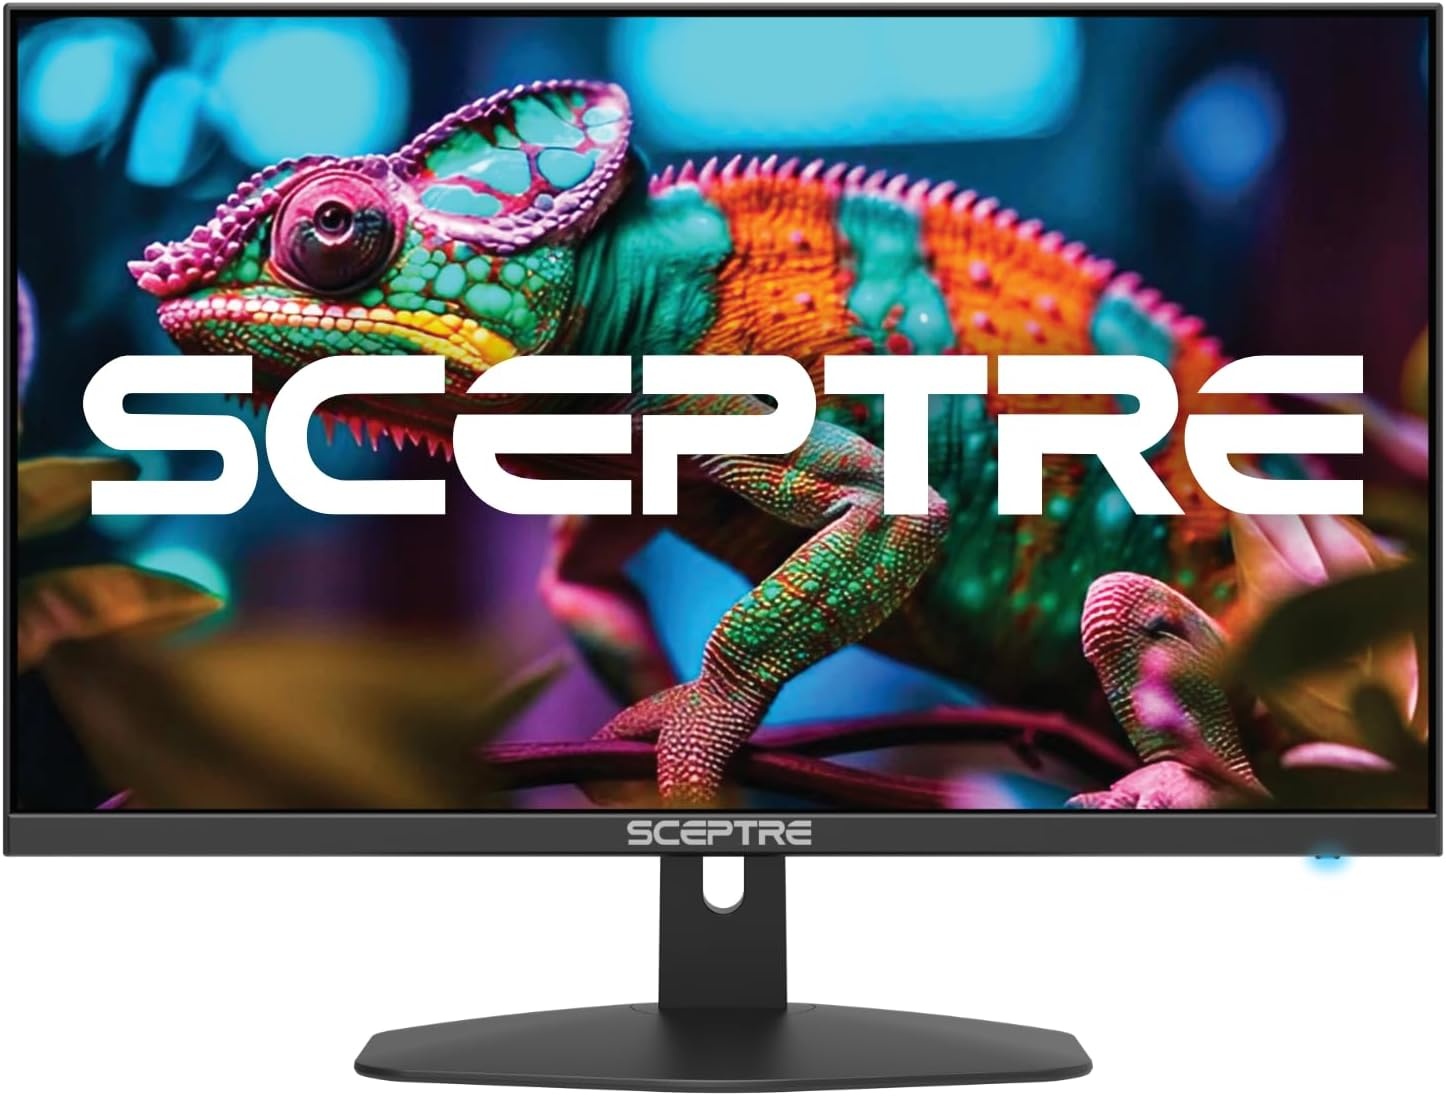 Sceptre New 27-inch Gaming Monitor - Showtime Computer